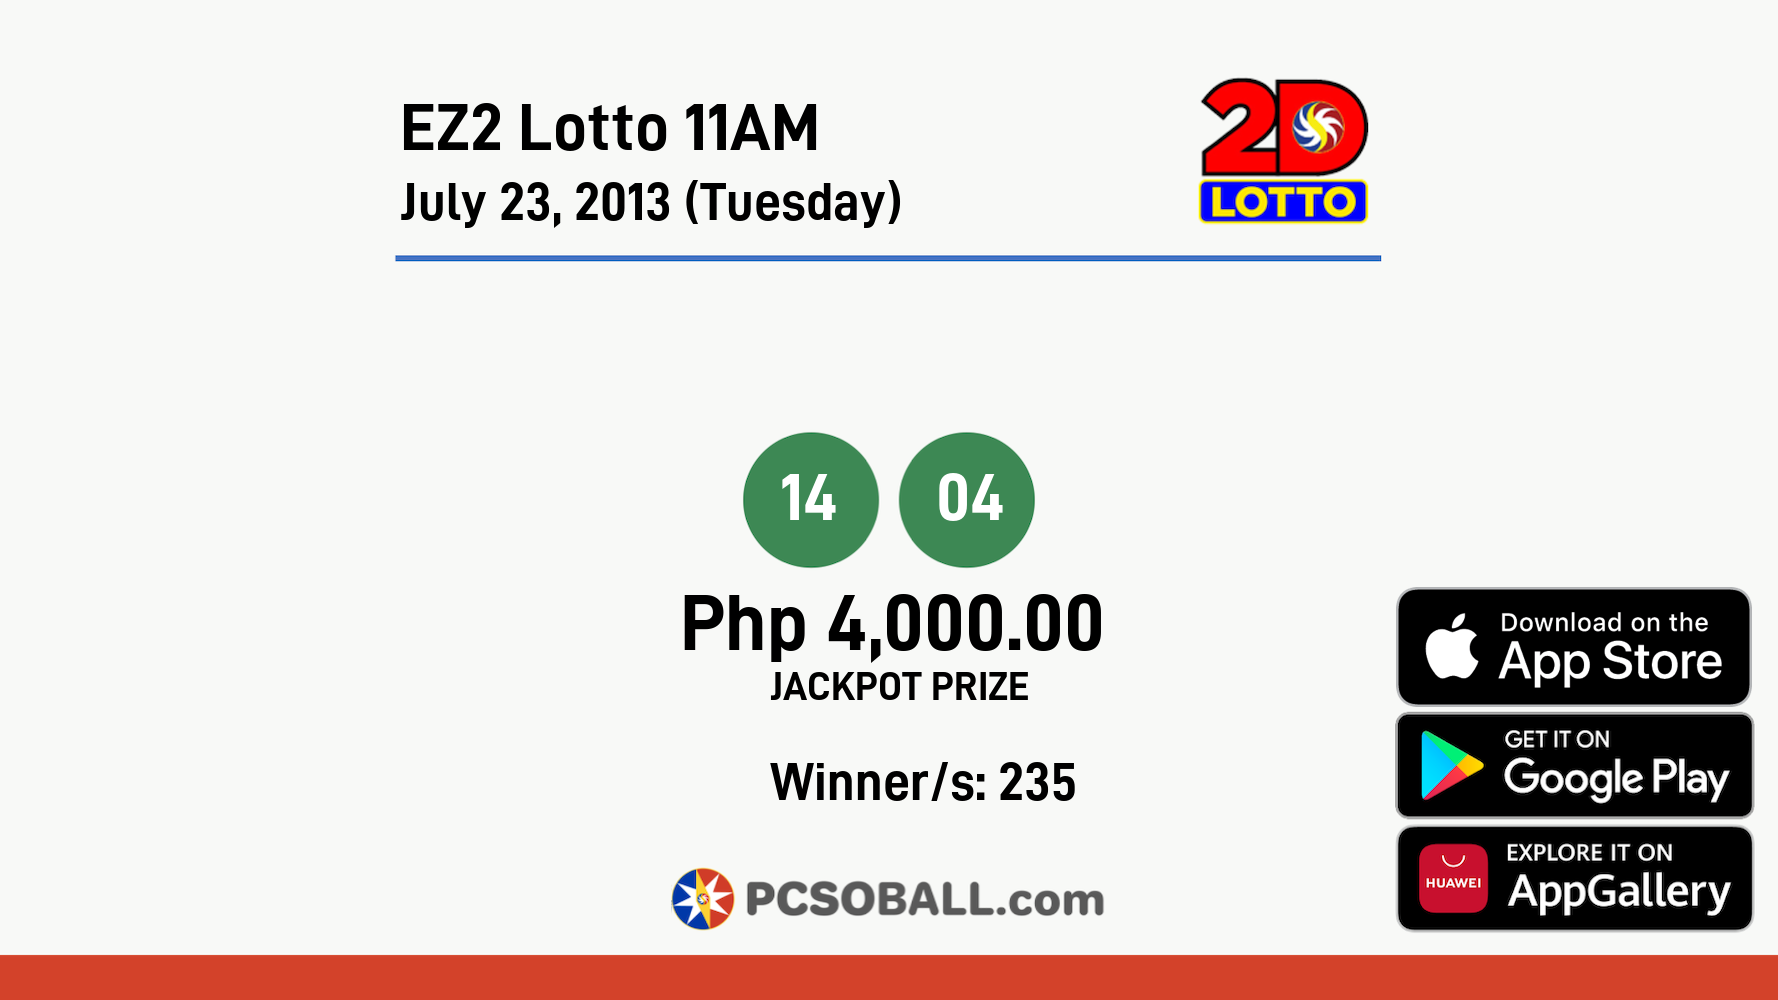 EZ2 Lotto 11AM July 23, 2013 (Tuesday) Result